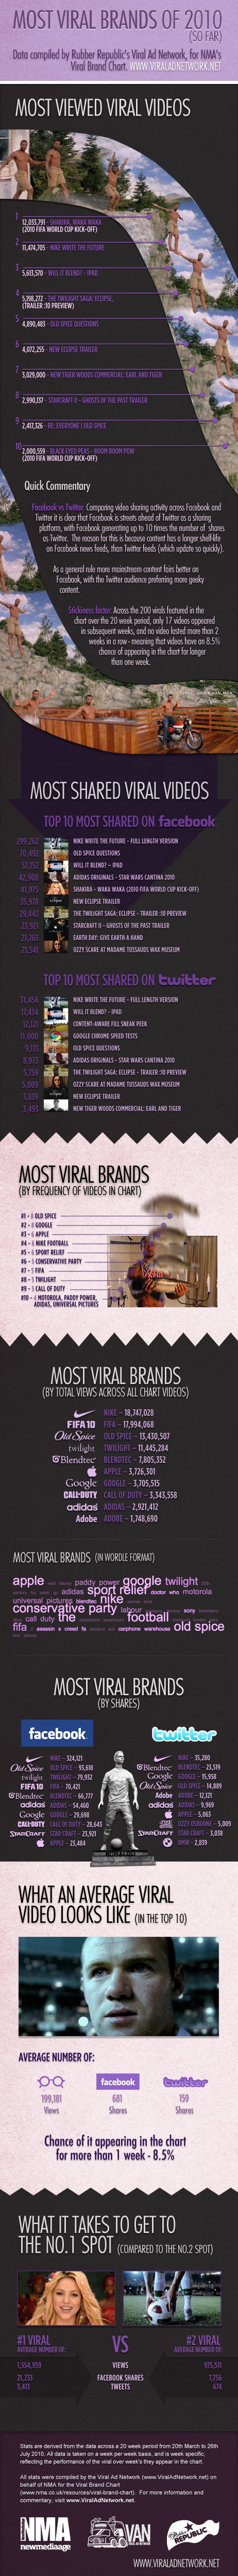 Most_Viral_Brands_2010_Infographic